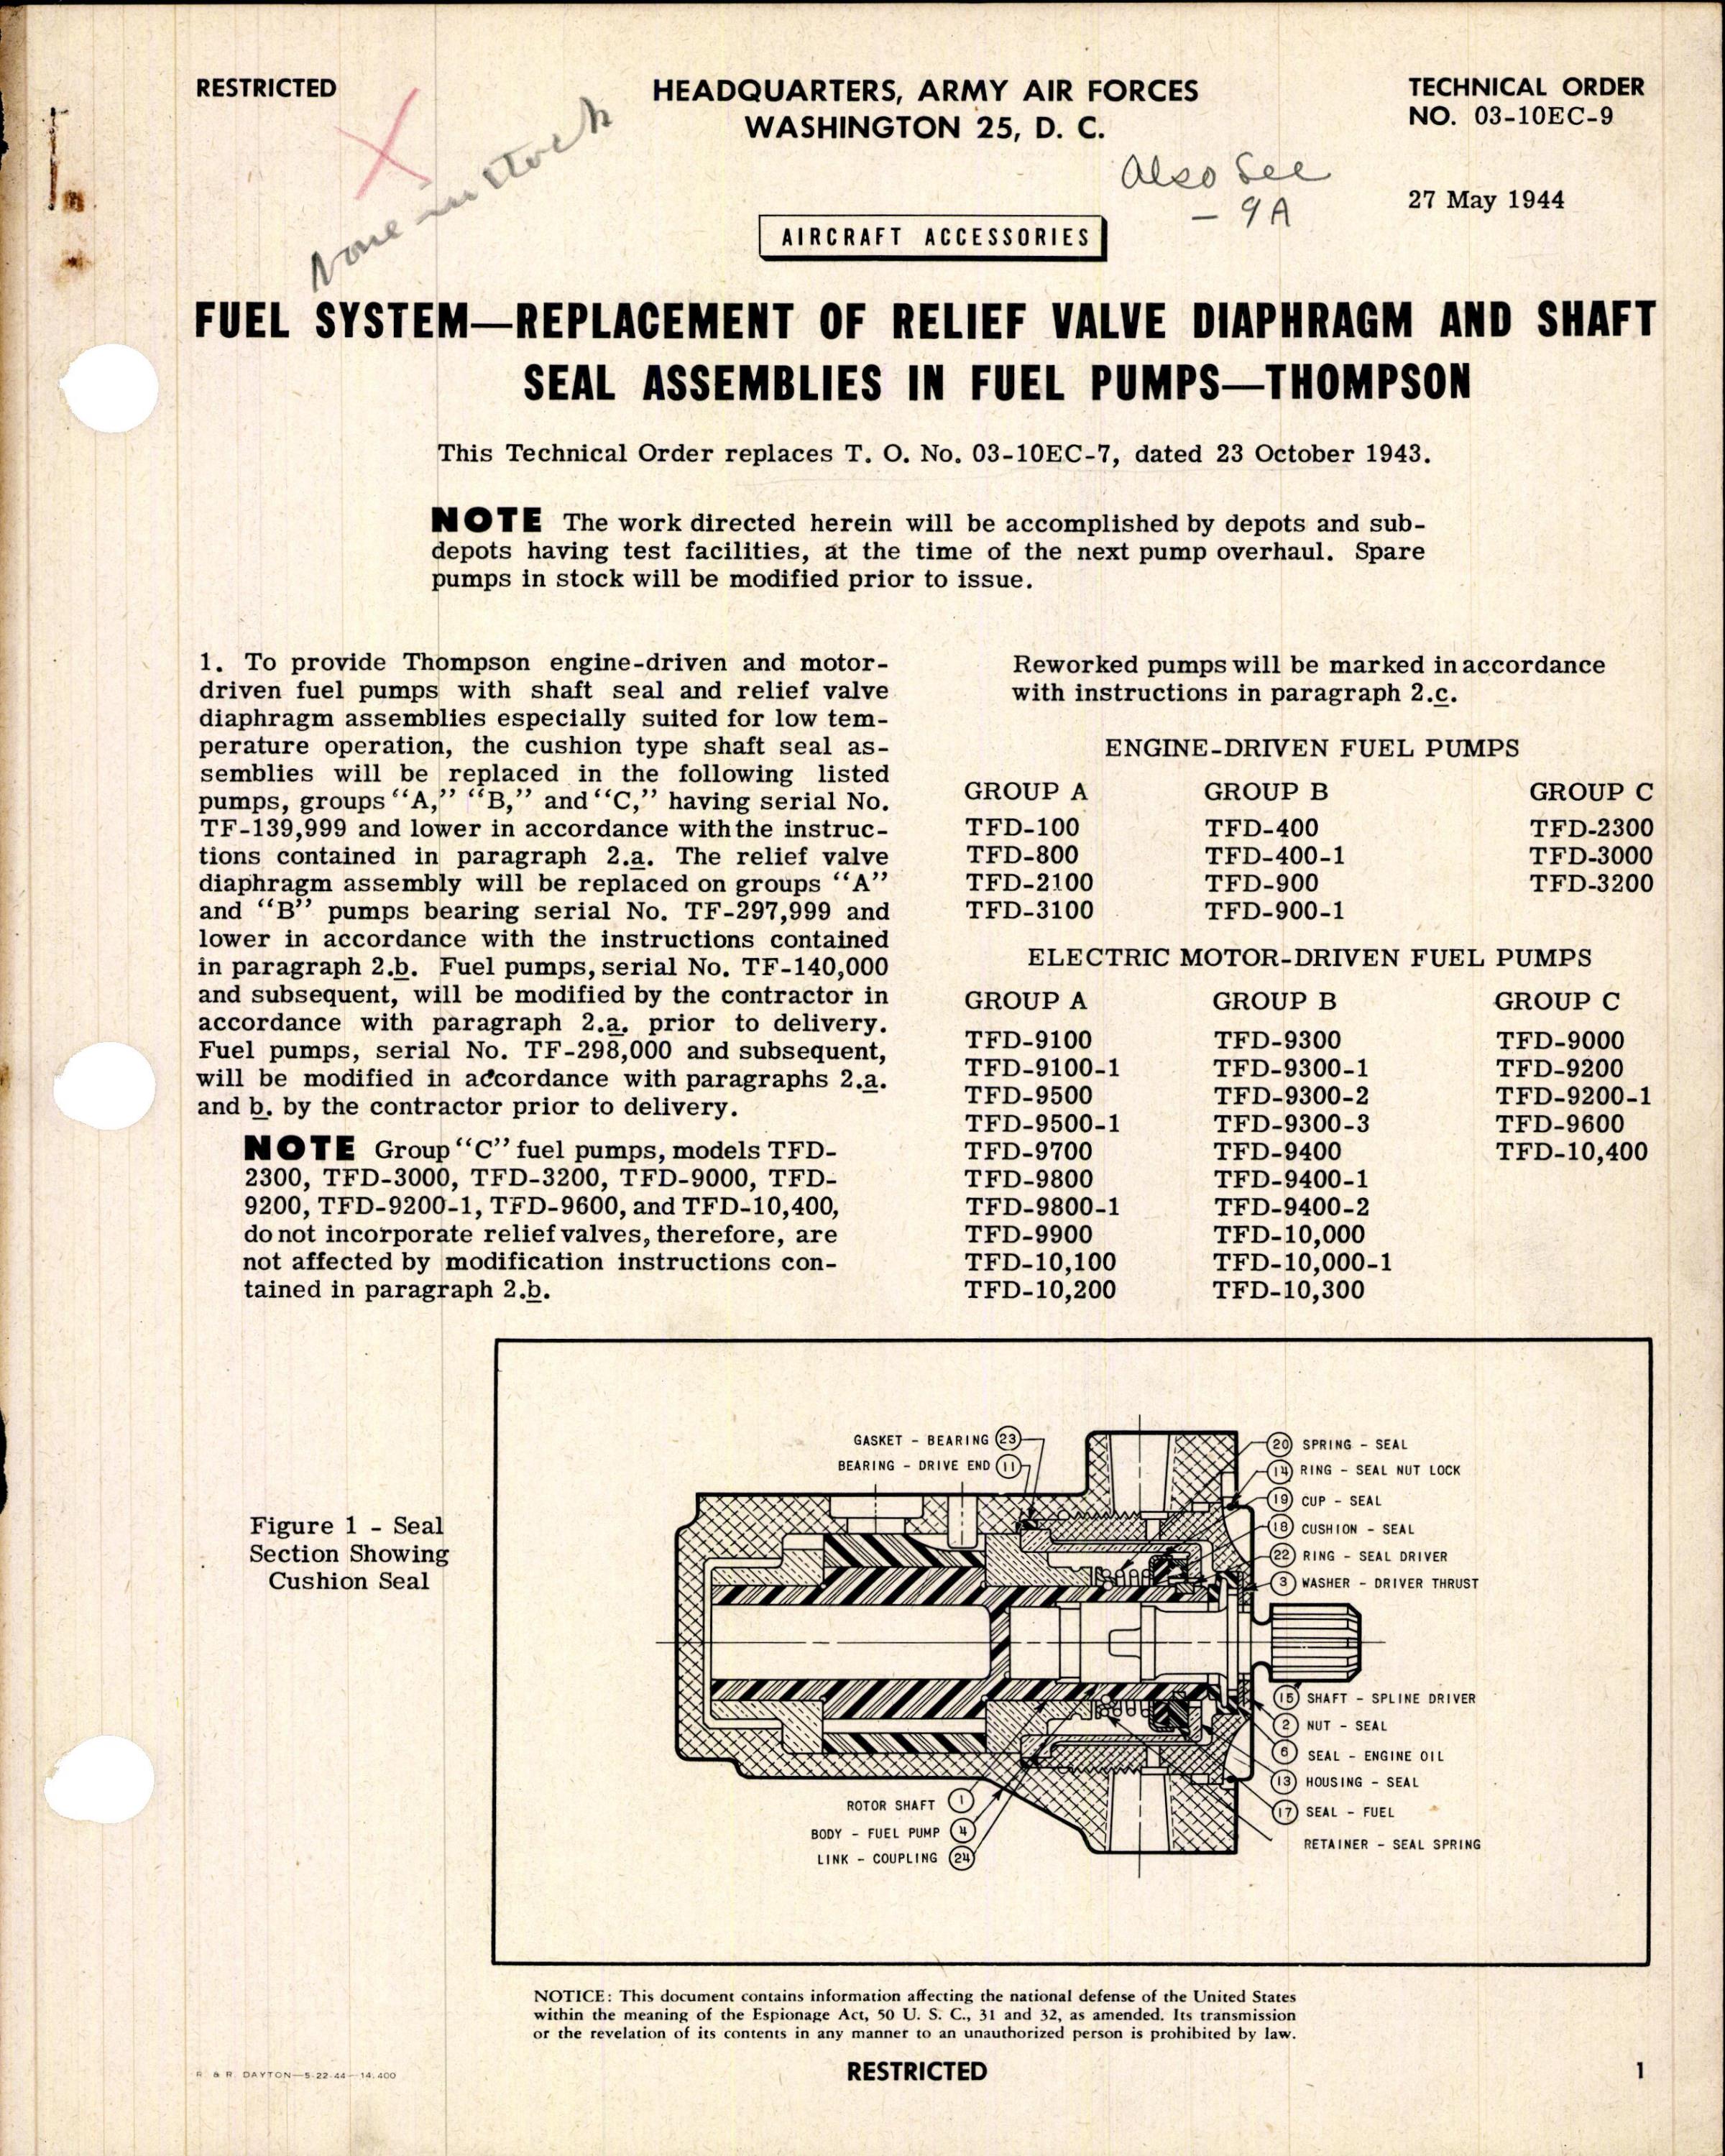 Sample page 1 from AirCorps Library document: Replacement of Relief Valve Diaphragm and Shaft Seal Assemblies in Thompson Fuel Pumps